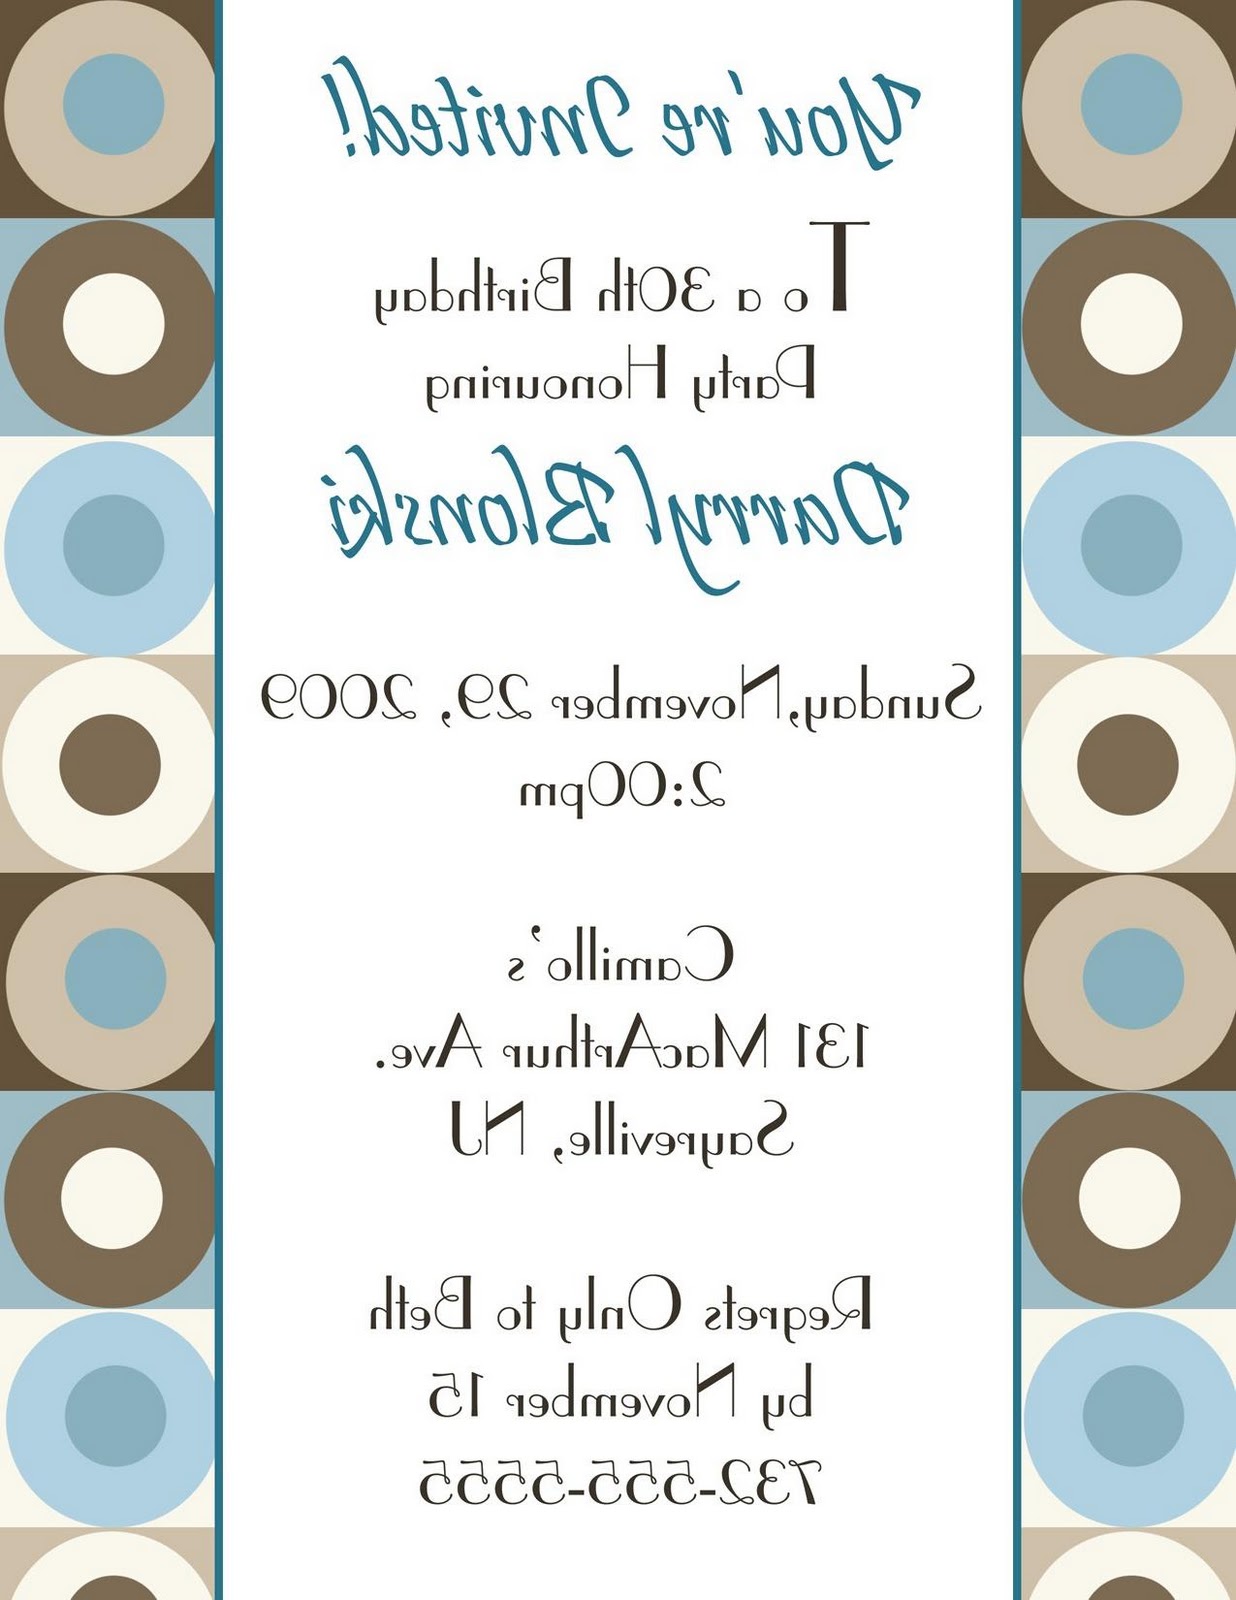 This one would make a cute invitation for a bridal shower, baby shower,